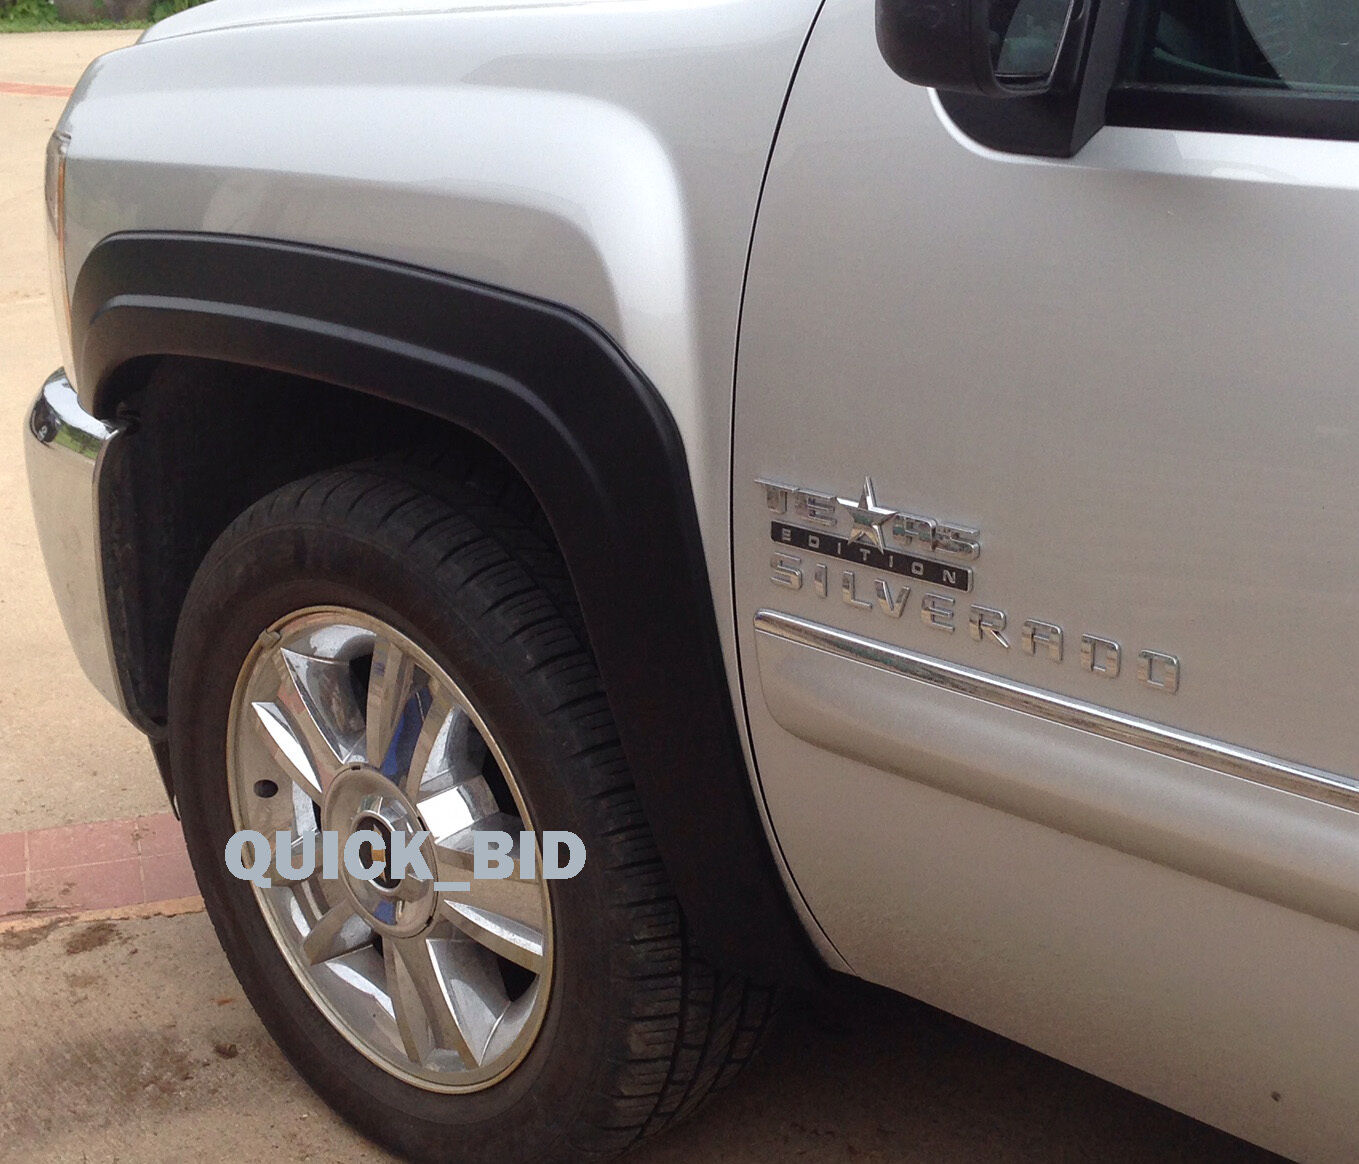 Factory Style Fender Flares for 2007-2013 Chevy Silverado 1500 Crew Cab 5.8' Bed